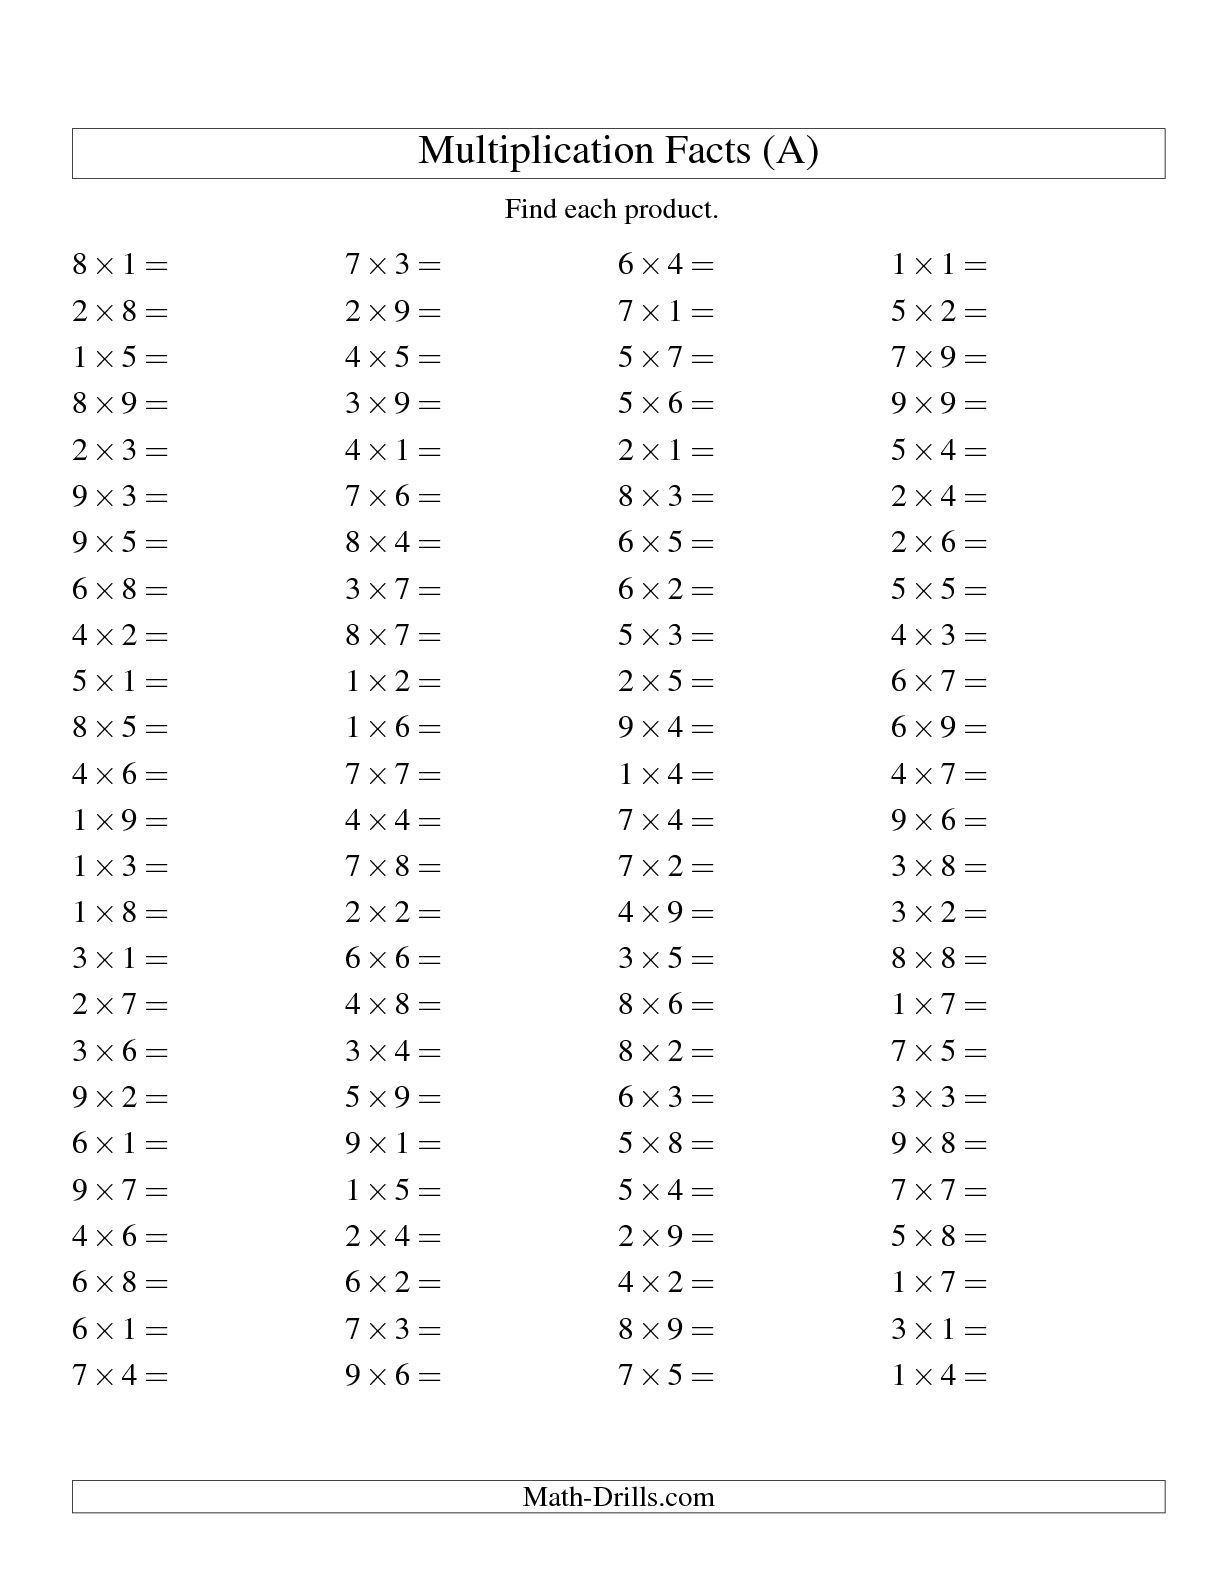 12-best-images-of-high-school-math-worksheets-multiplication-multiplication-table-chart-1-100